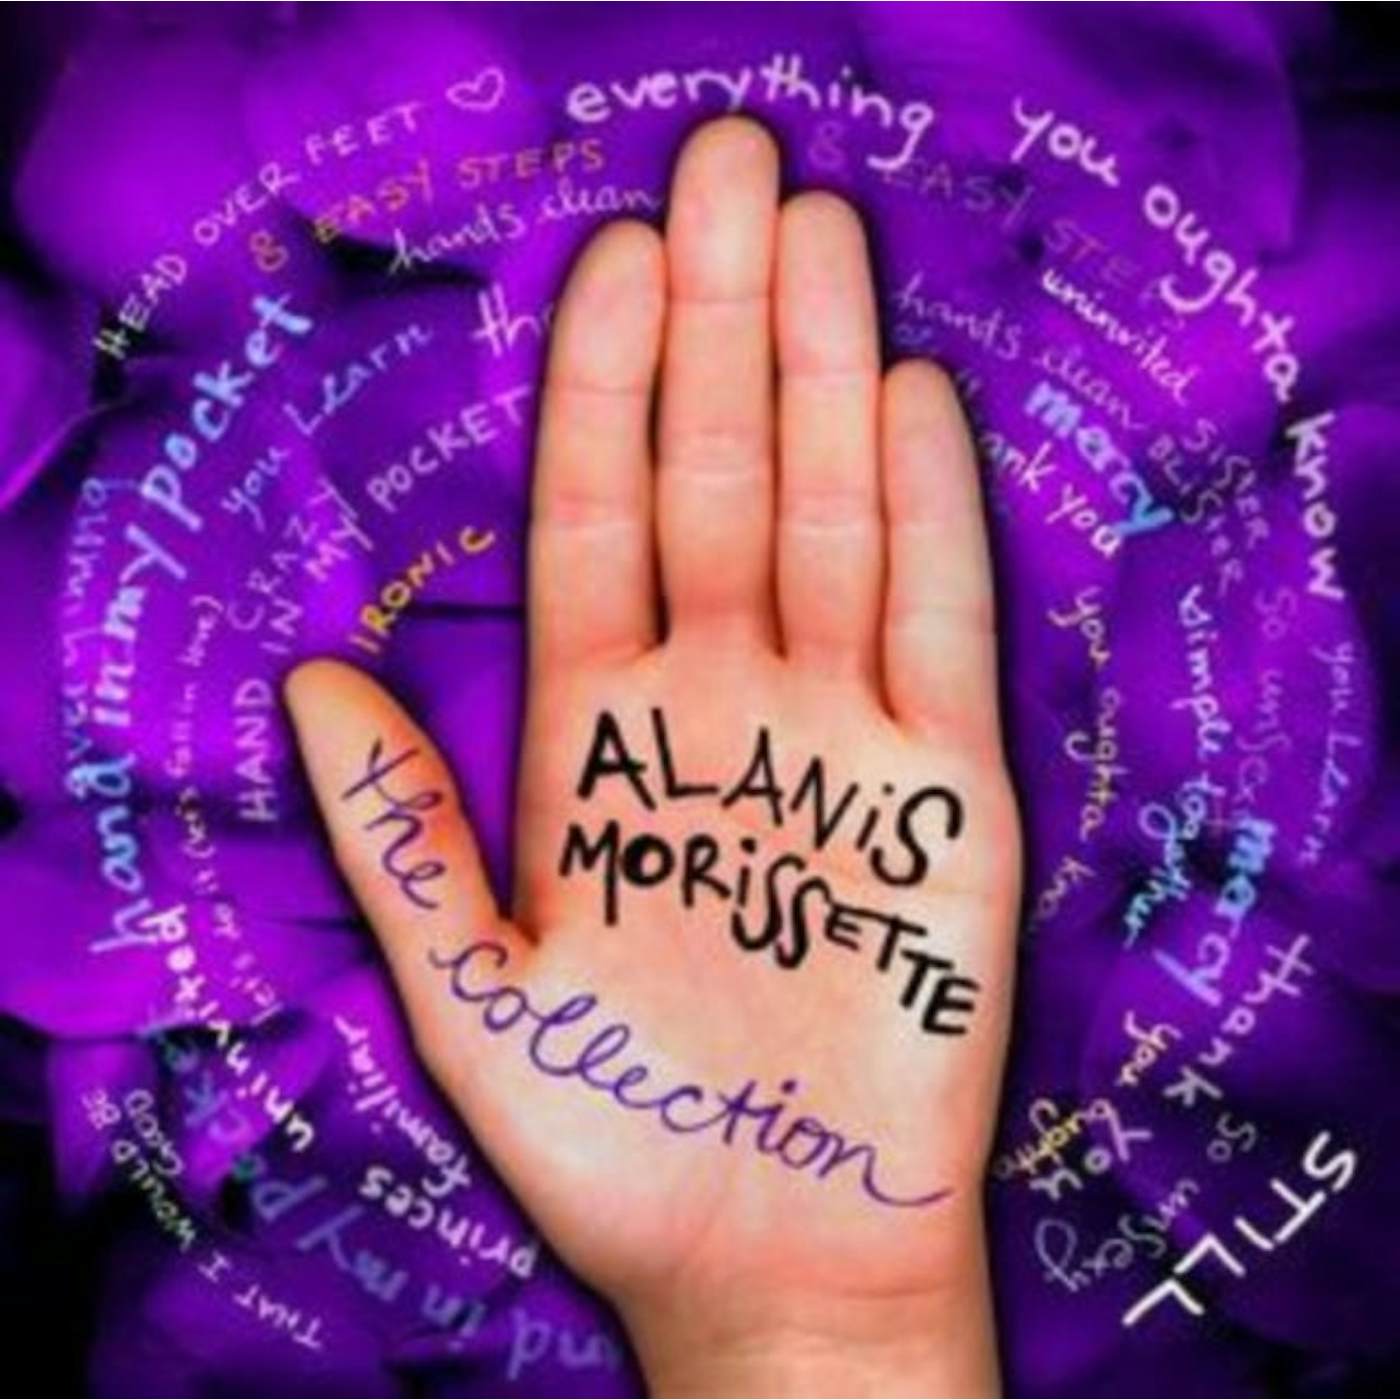 Alanis Morissette CD - The Collection